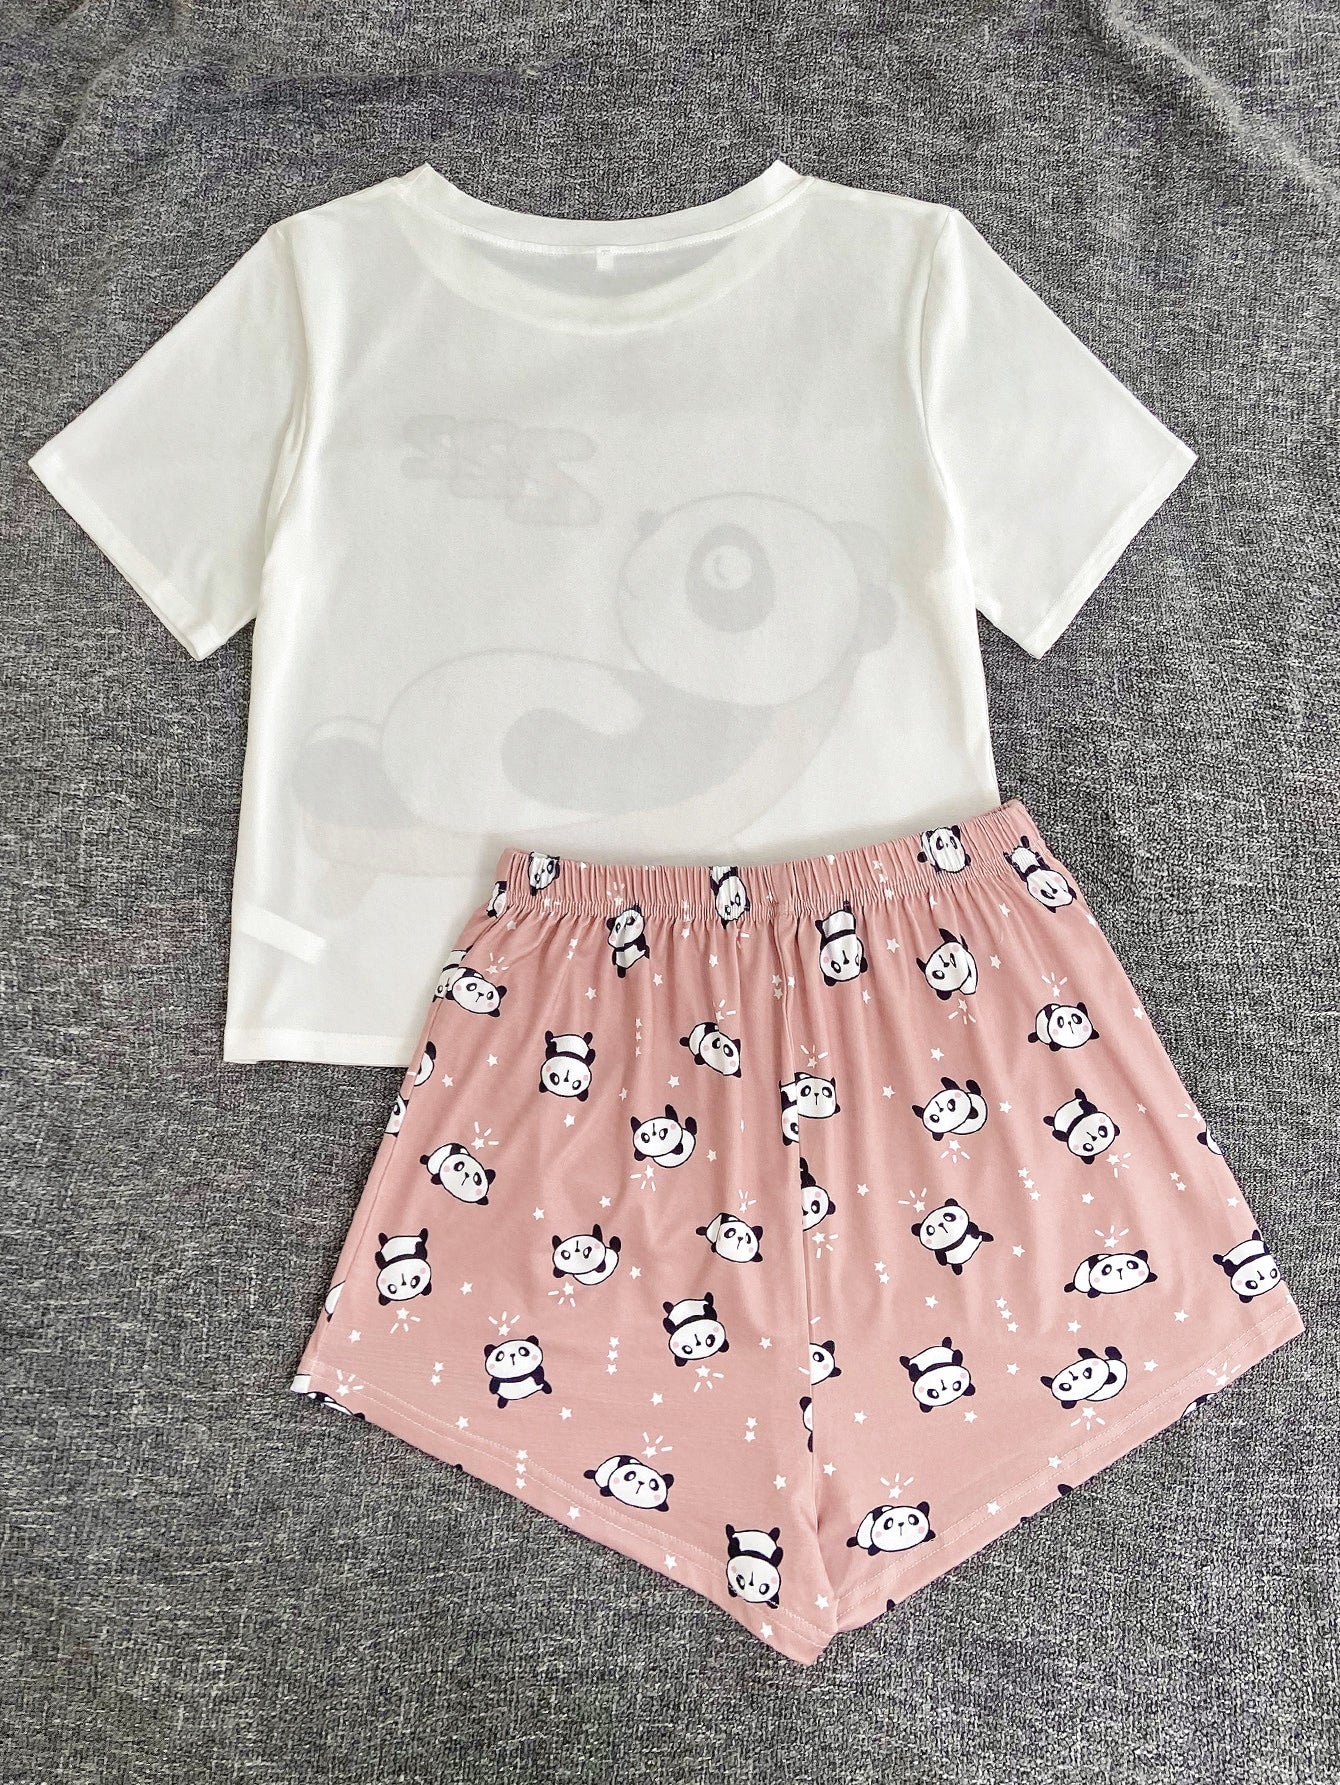 Panda And Letter Graphic Tee & Shorts PJ Set